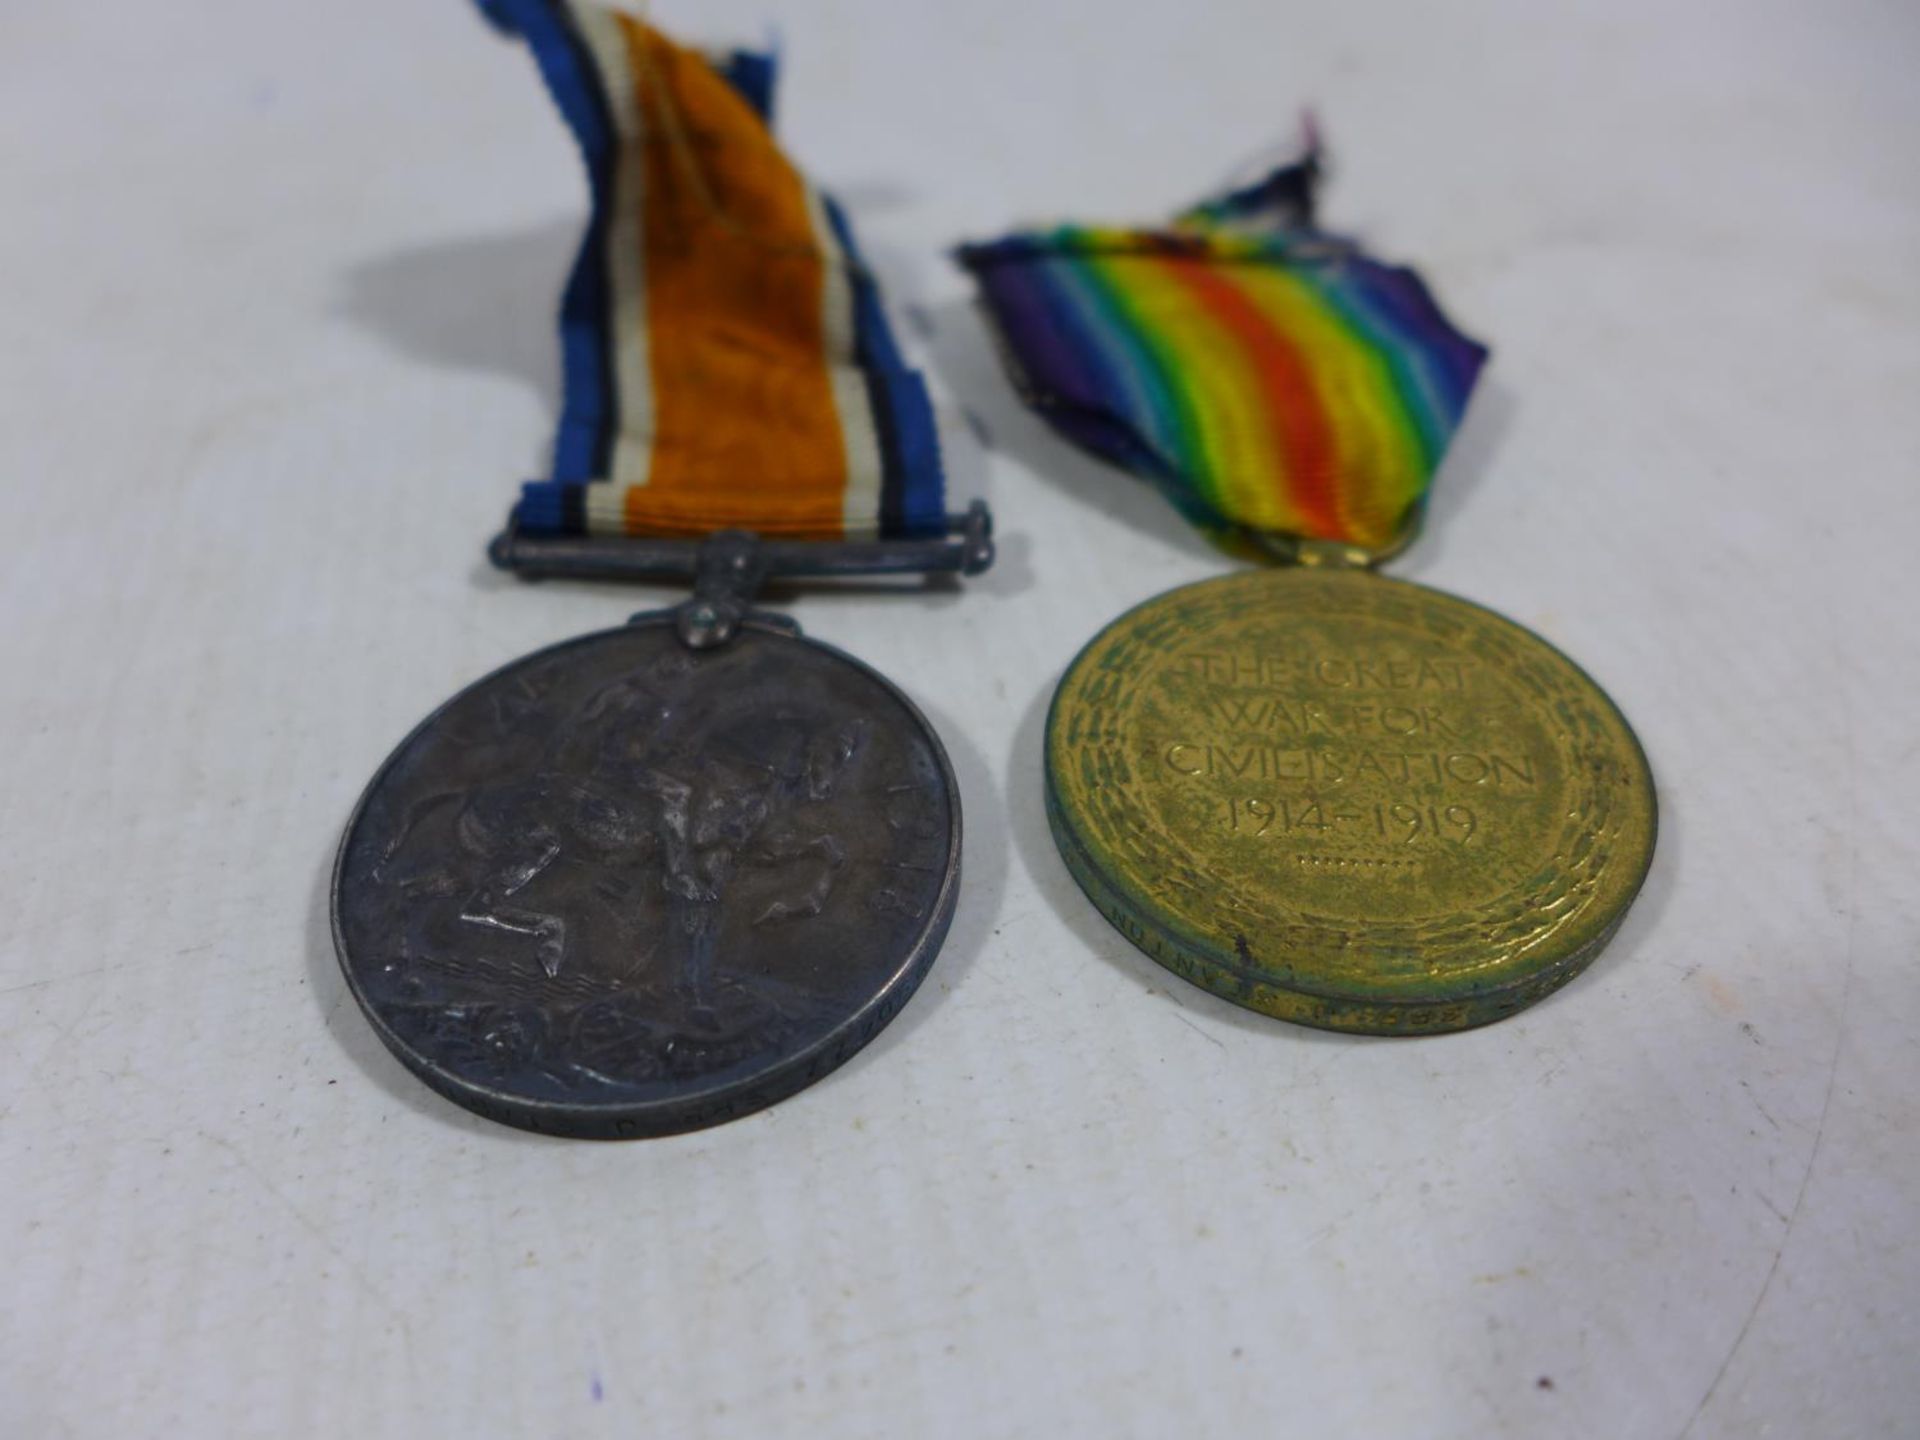 A WORLD WAR I MEDAL PAIR AWARDED TO 290477 SAPPER J STANTON ROYAL ENGINEERS - Image 2 of 2